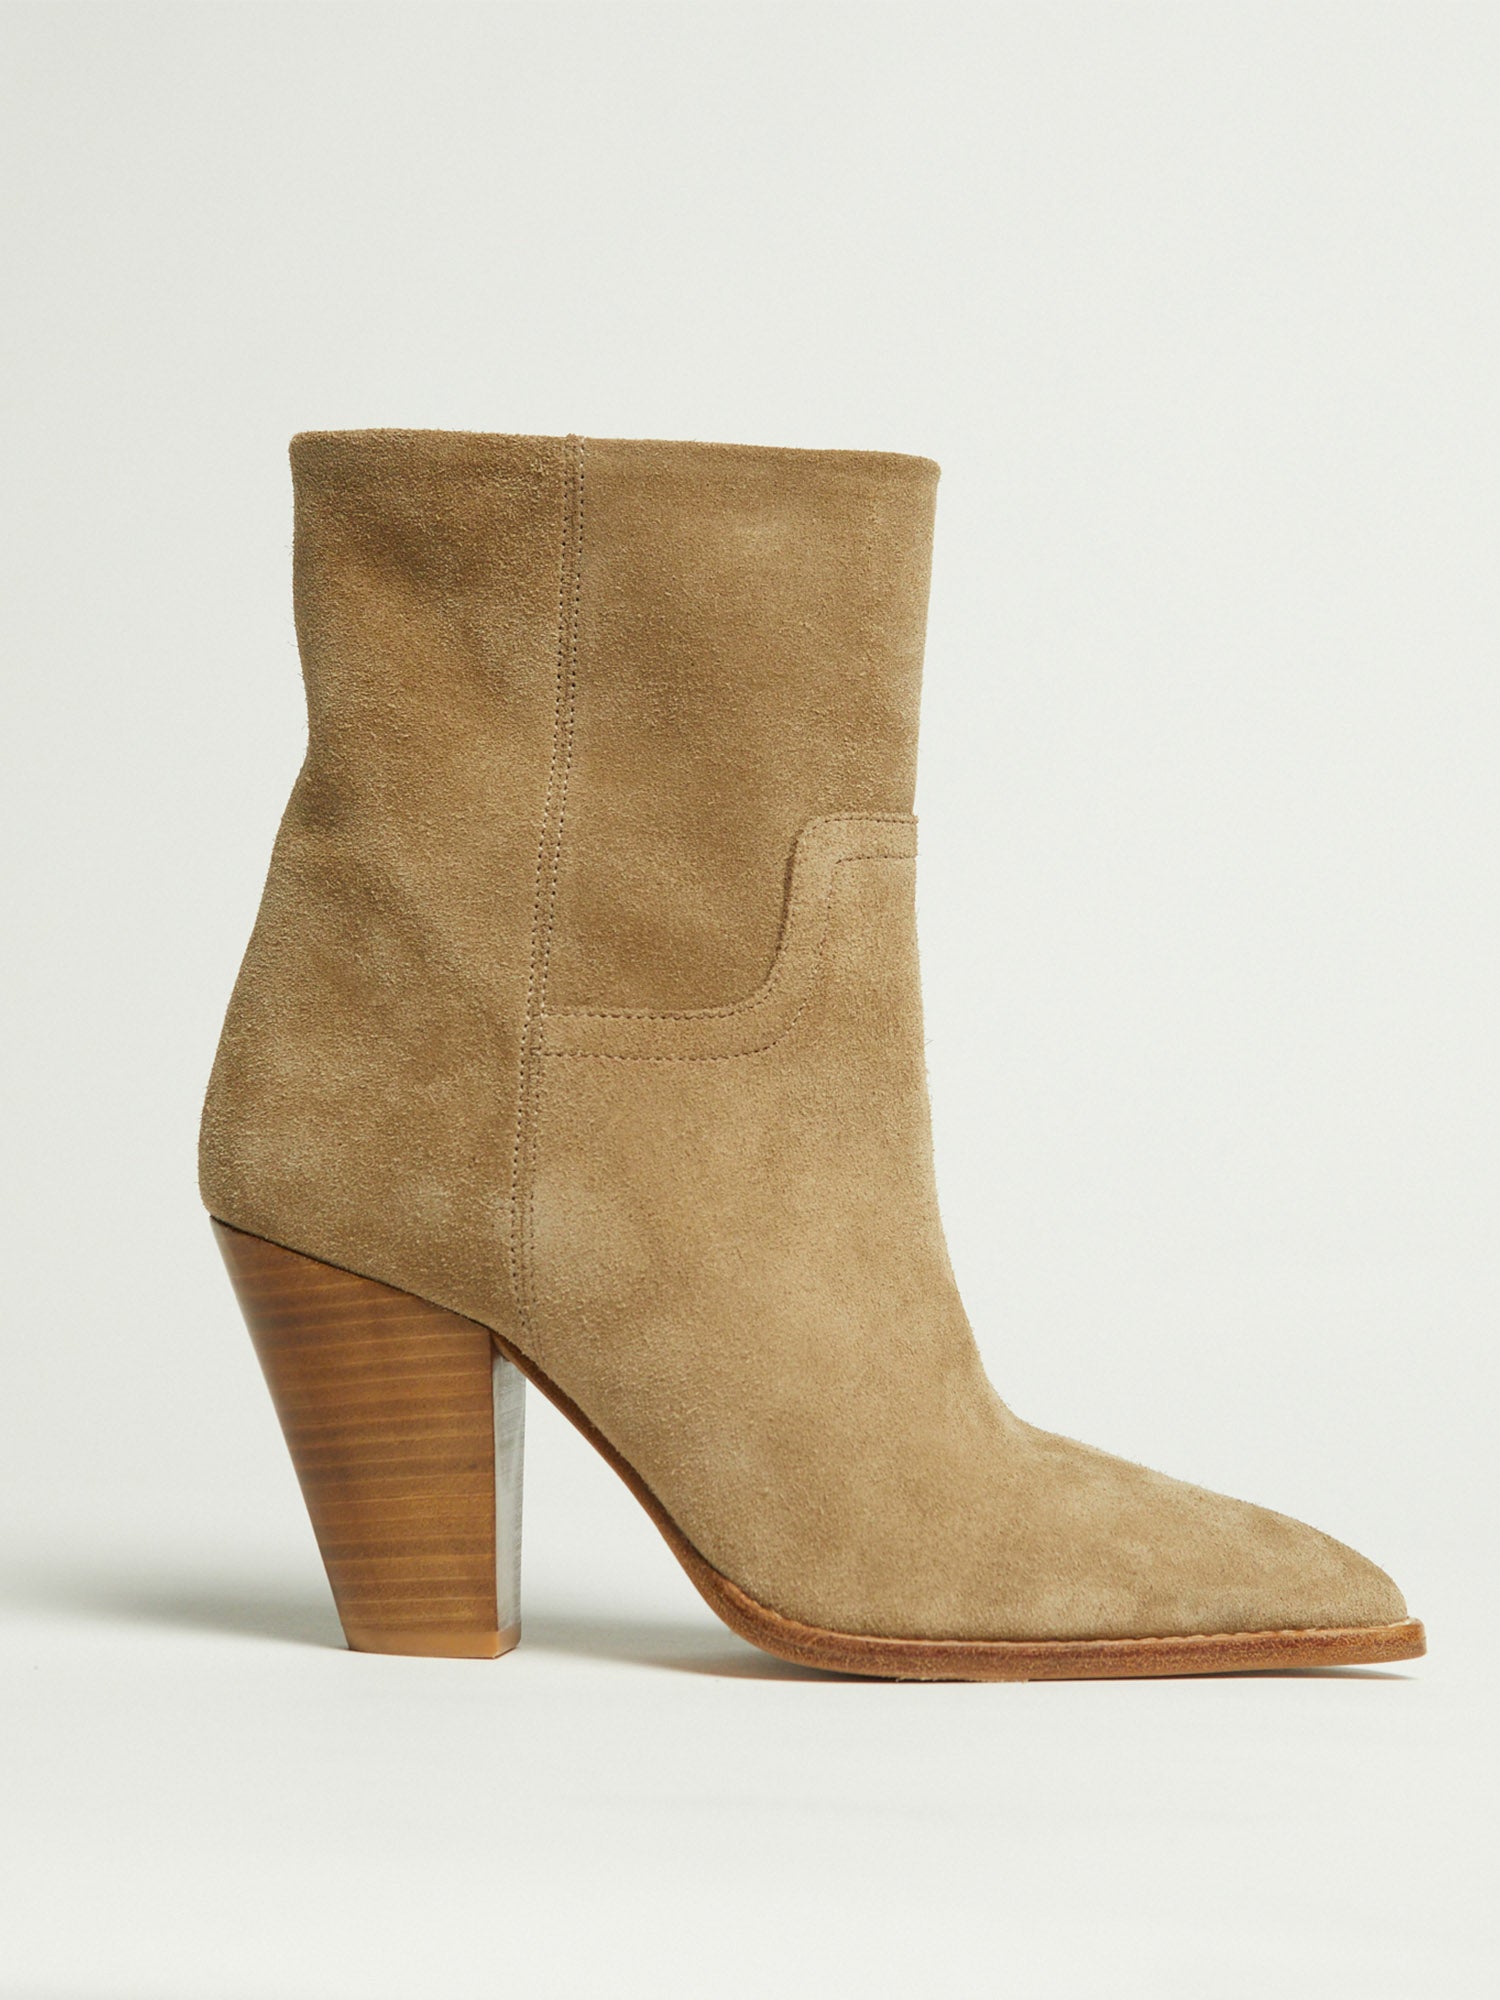 Tan Suede Creeper Ankle Boots